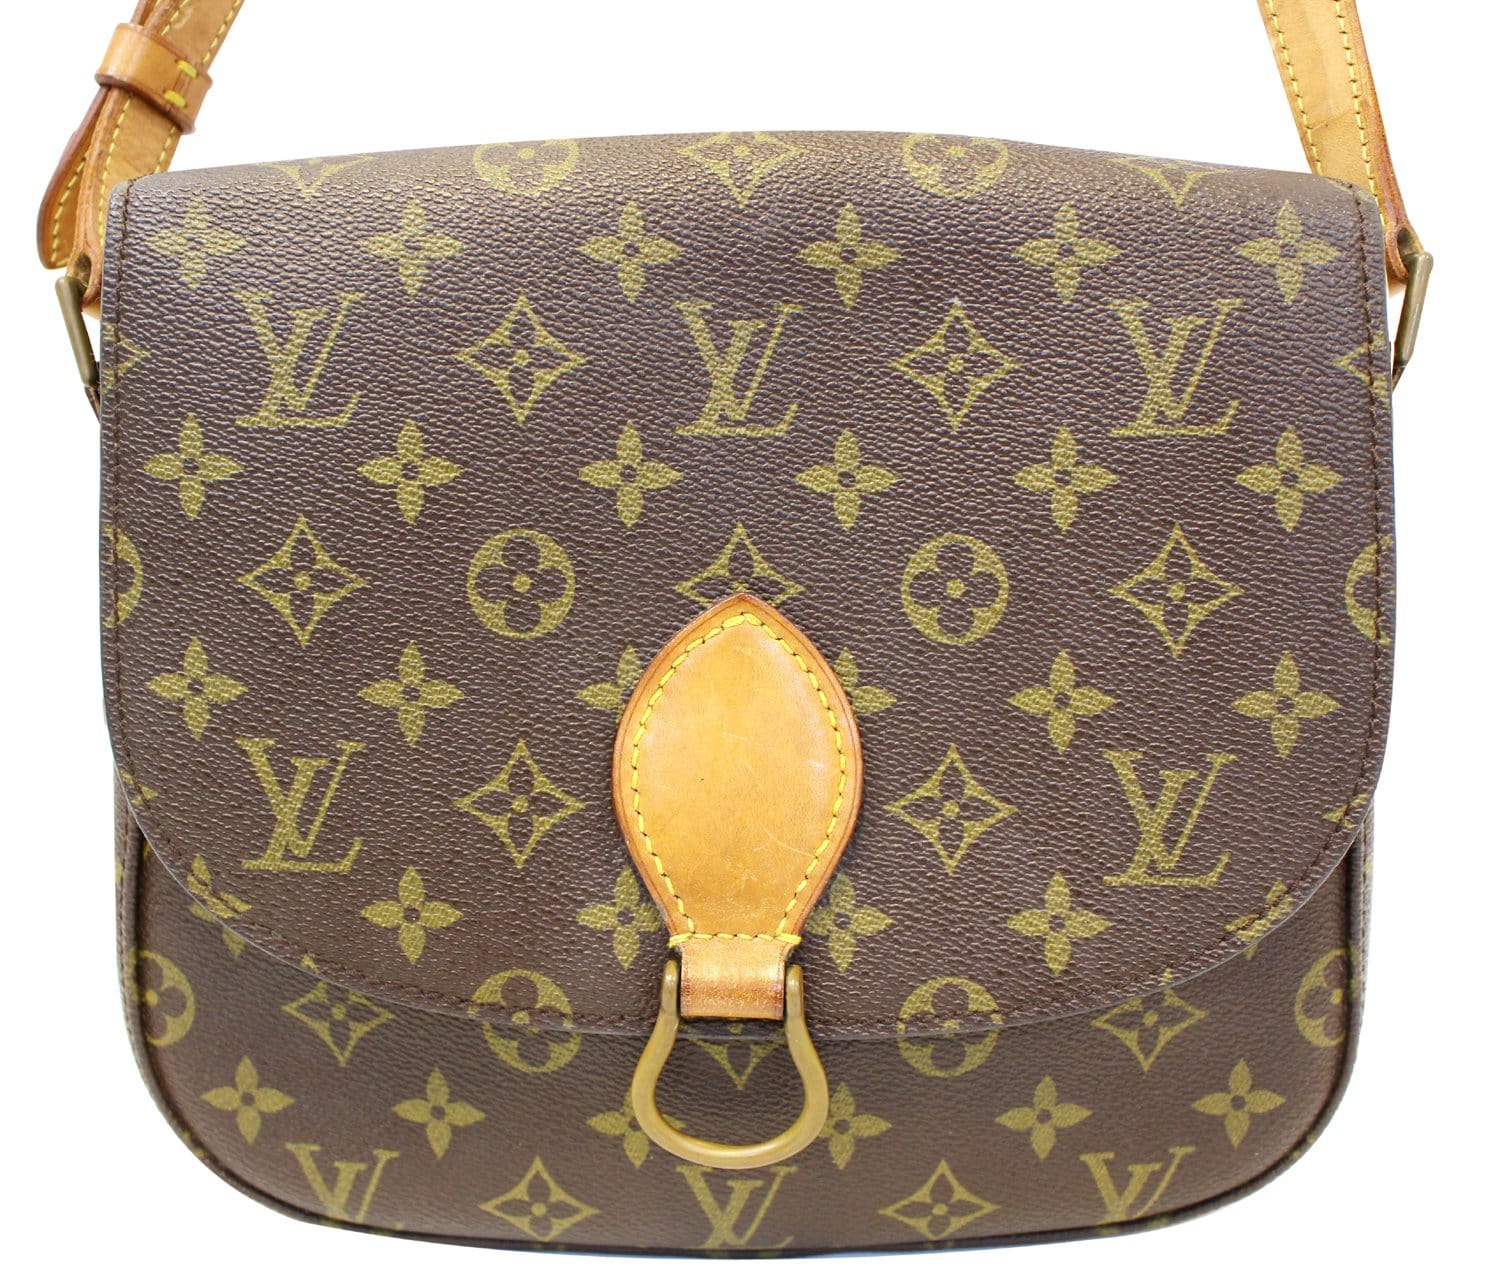 Very lightly used and new Louis Vuitton Pochette Metis for sale! Very  sought after bag